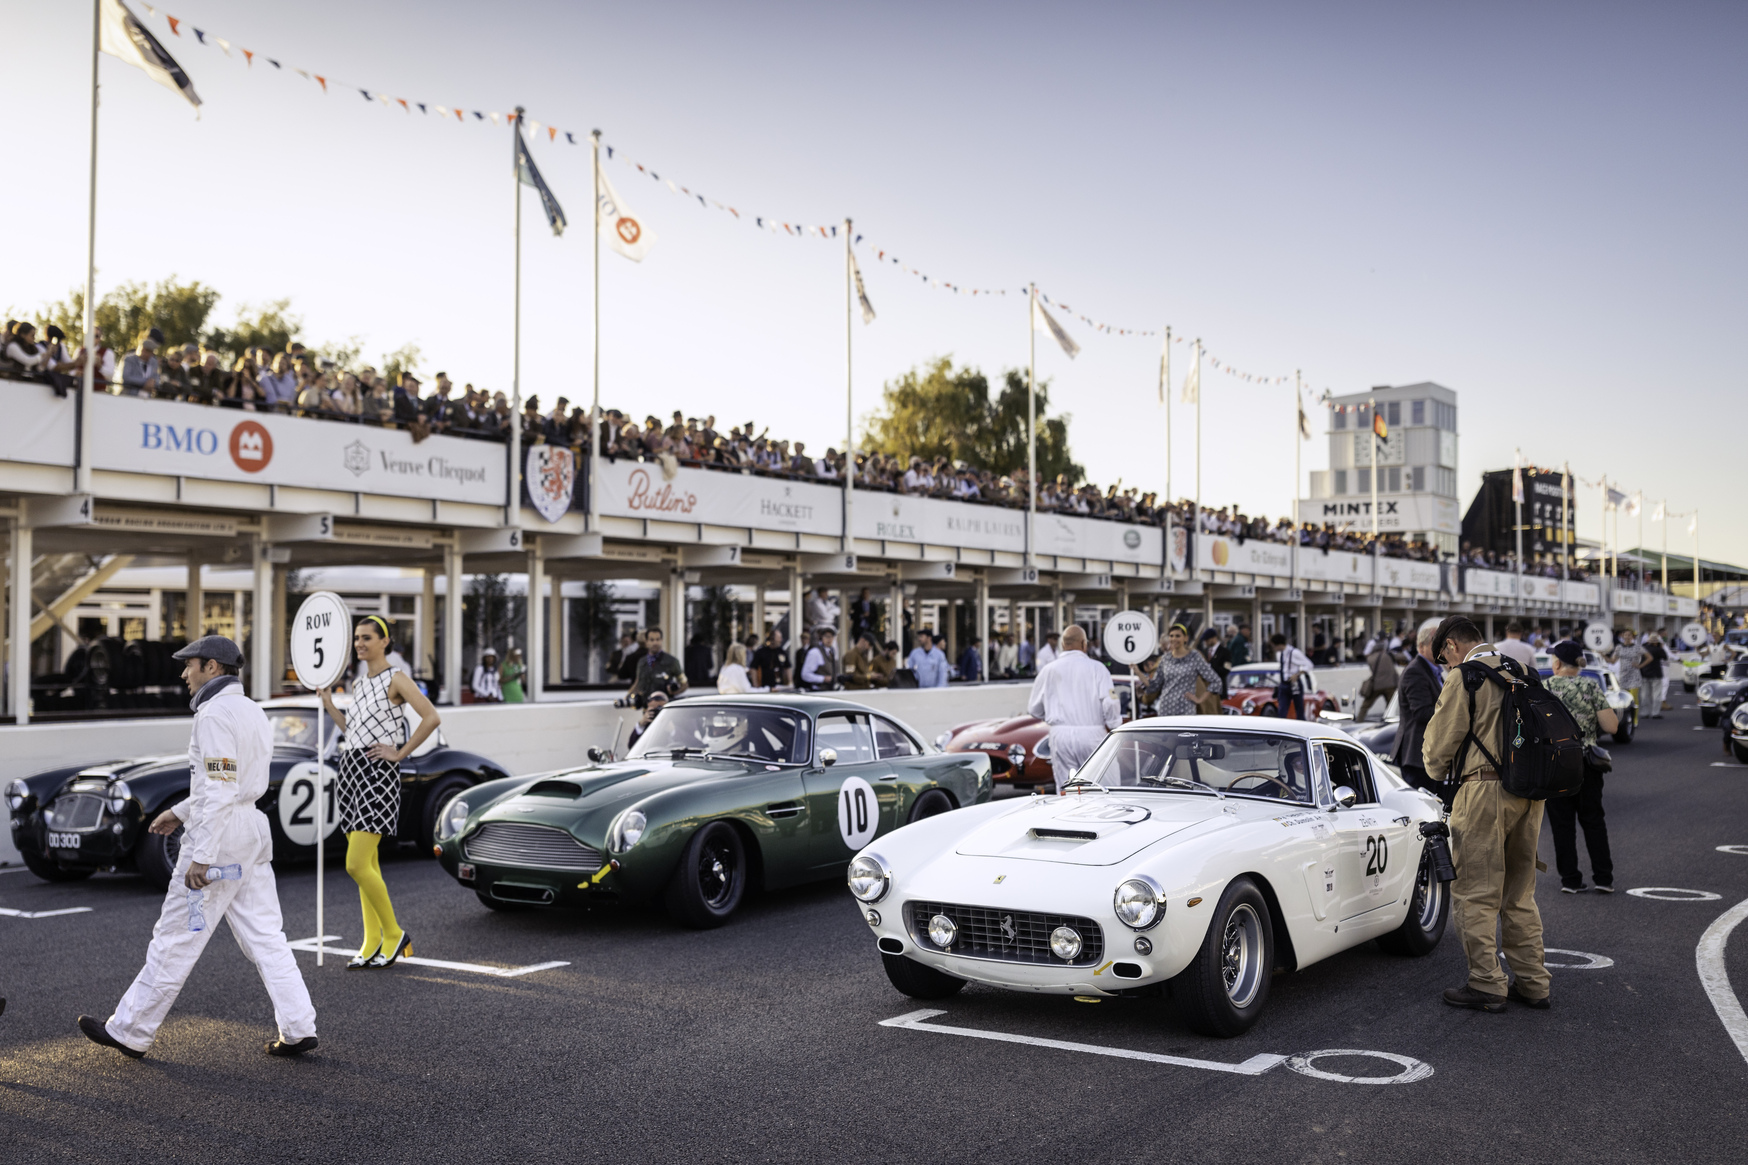 Good news! Goodwood revived for 2021